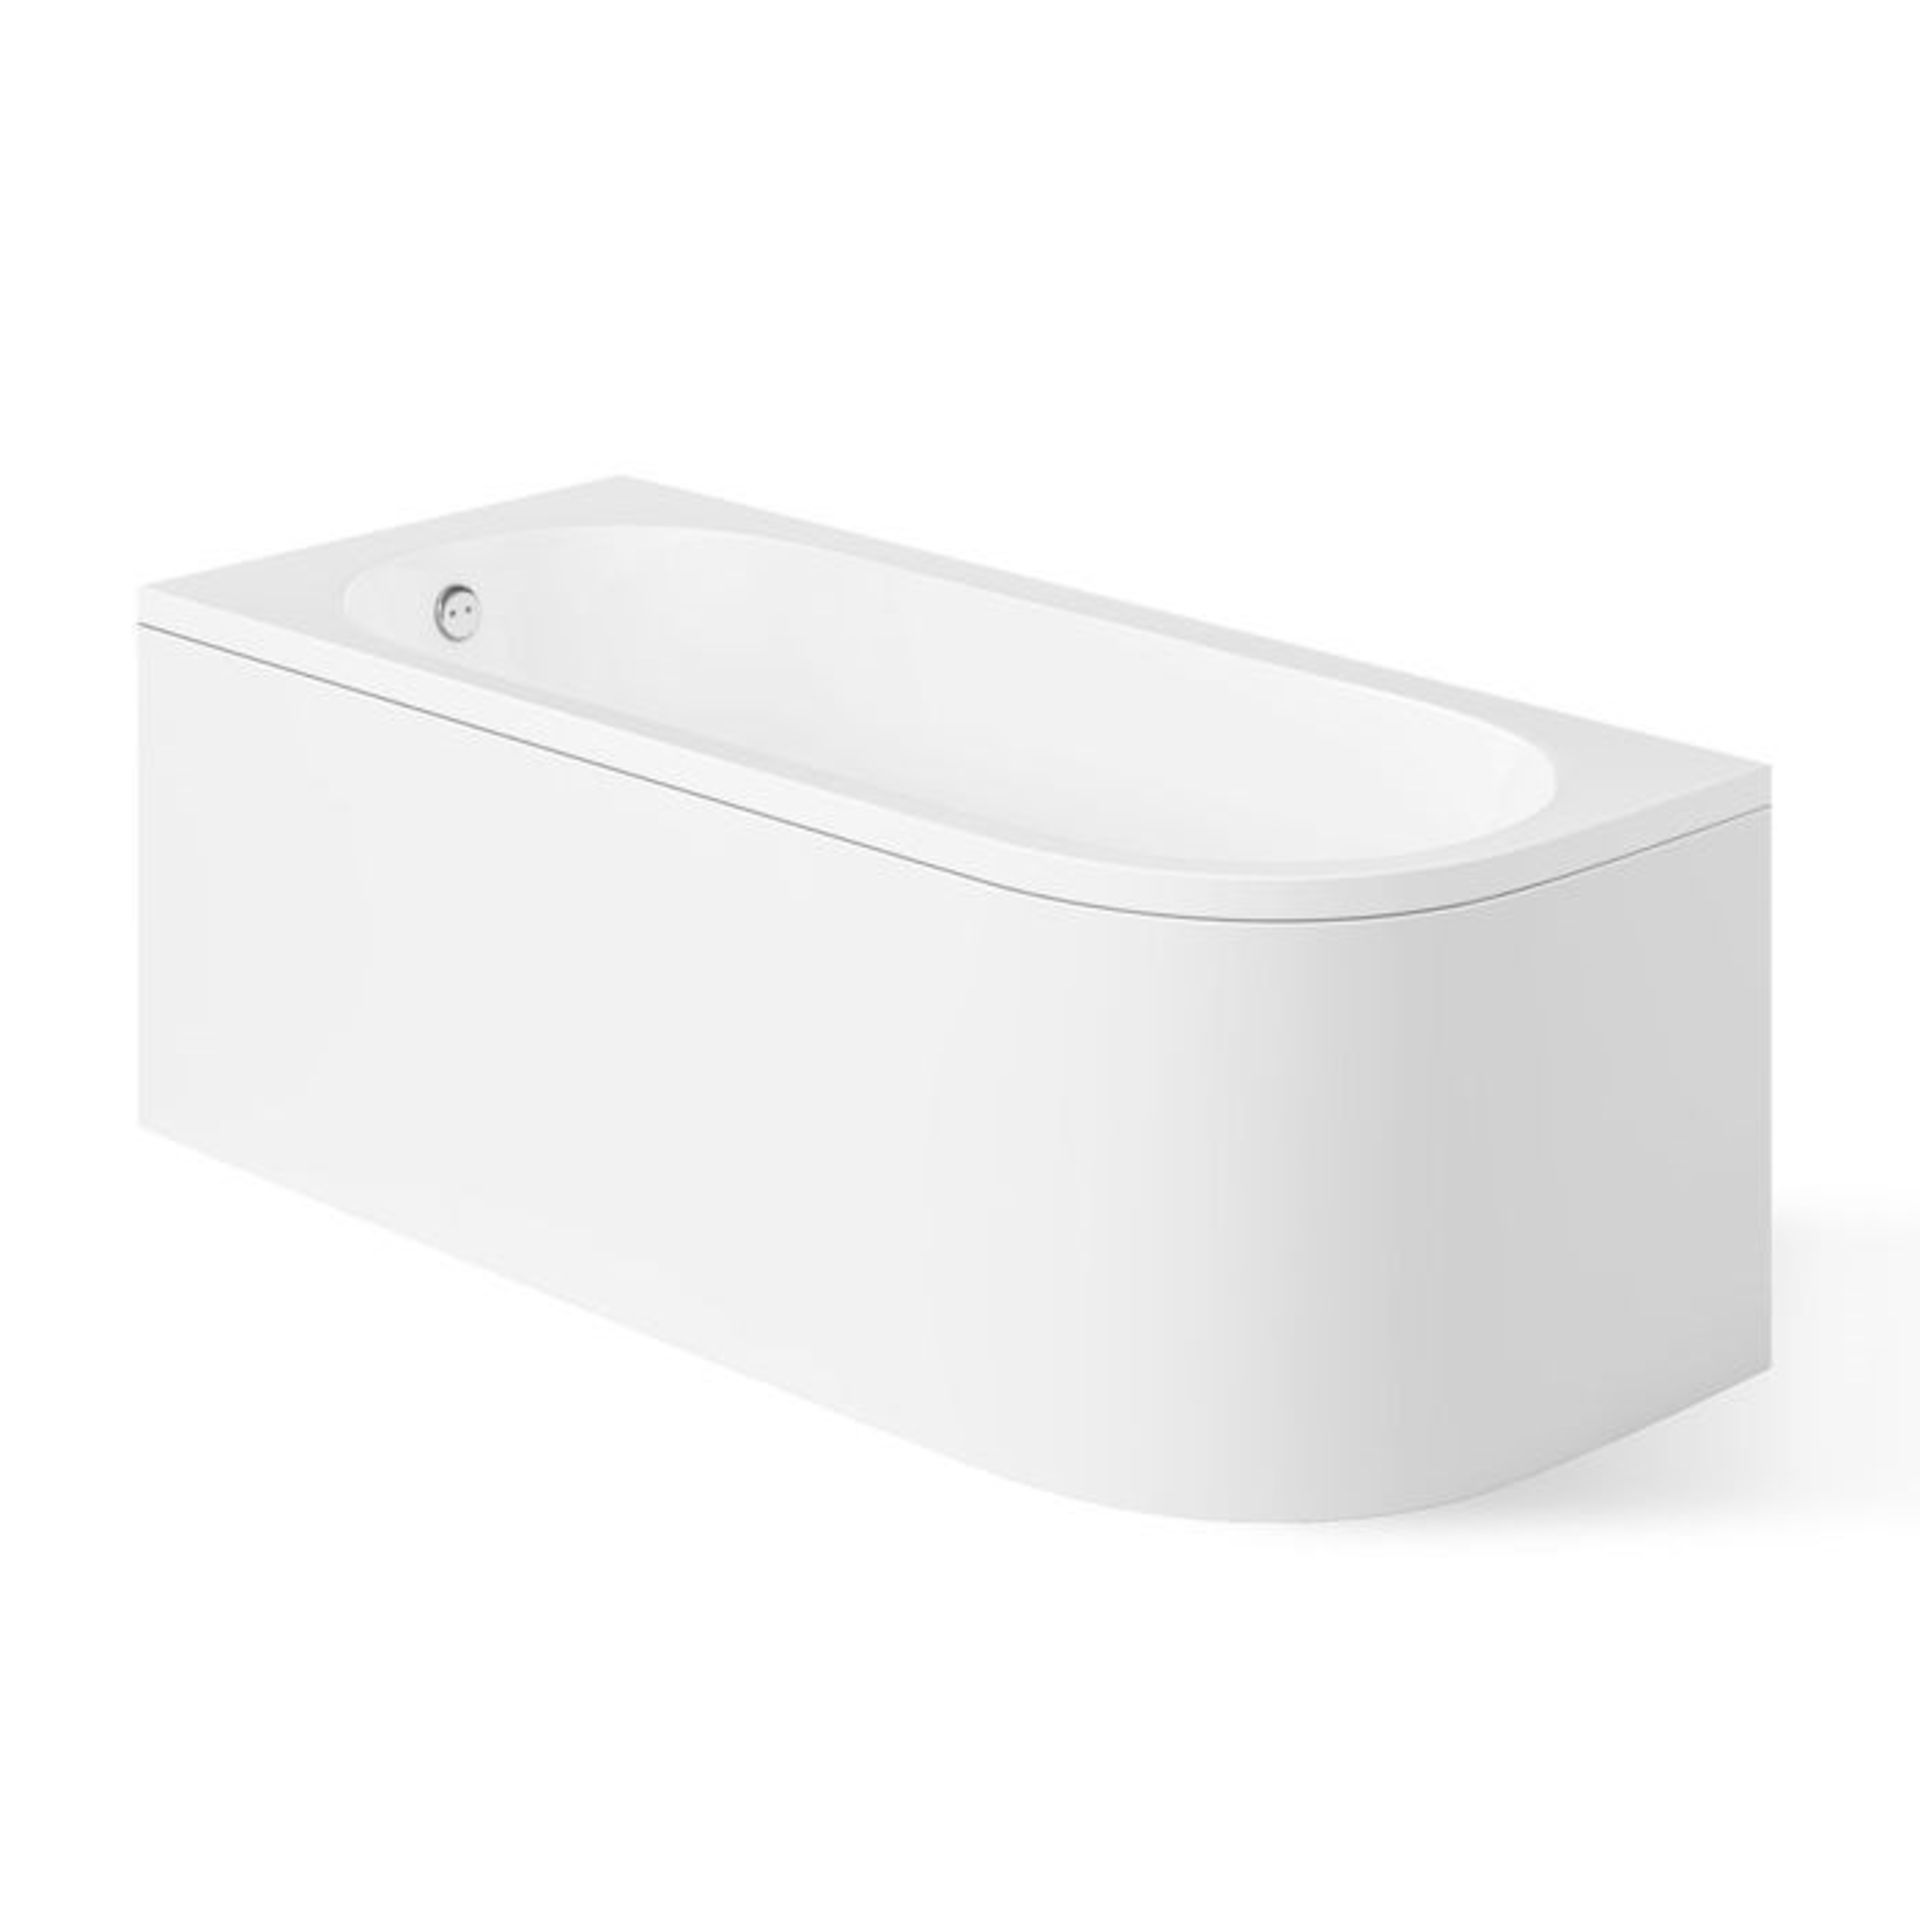 (KL94) 1695x745mm Denver Corner Back to Wall Bath (Includes Panels) - Left Hand. RRP £499.99. Double - Image 2 of 4